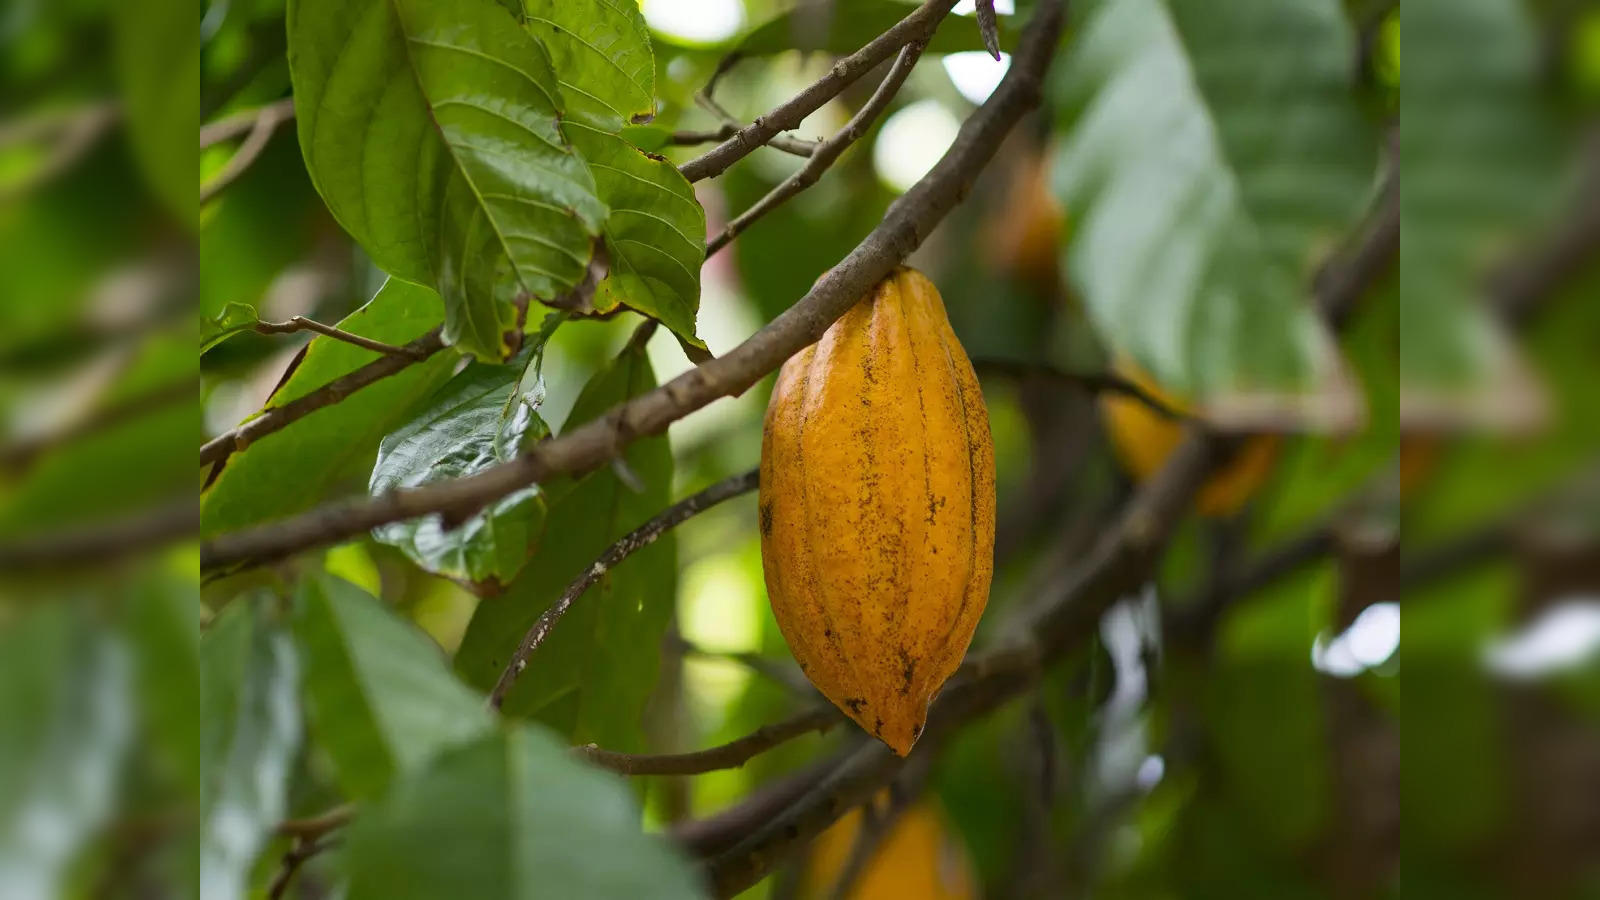 Chocolate is set to get more expensive as cocoa prices soar to